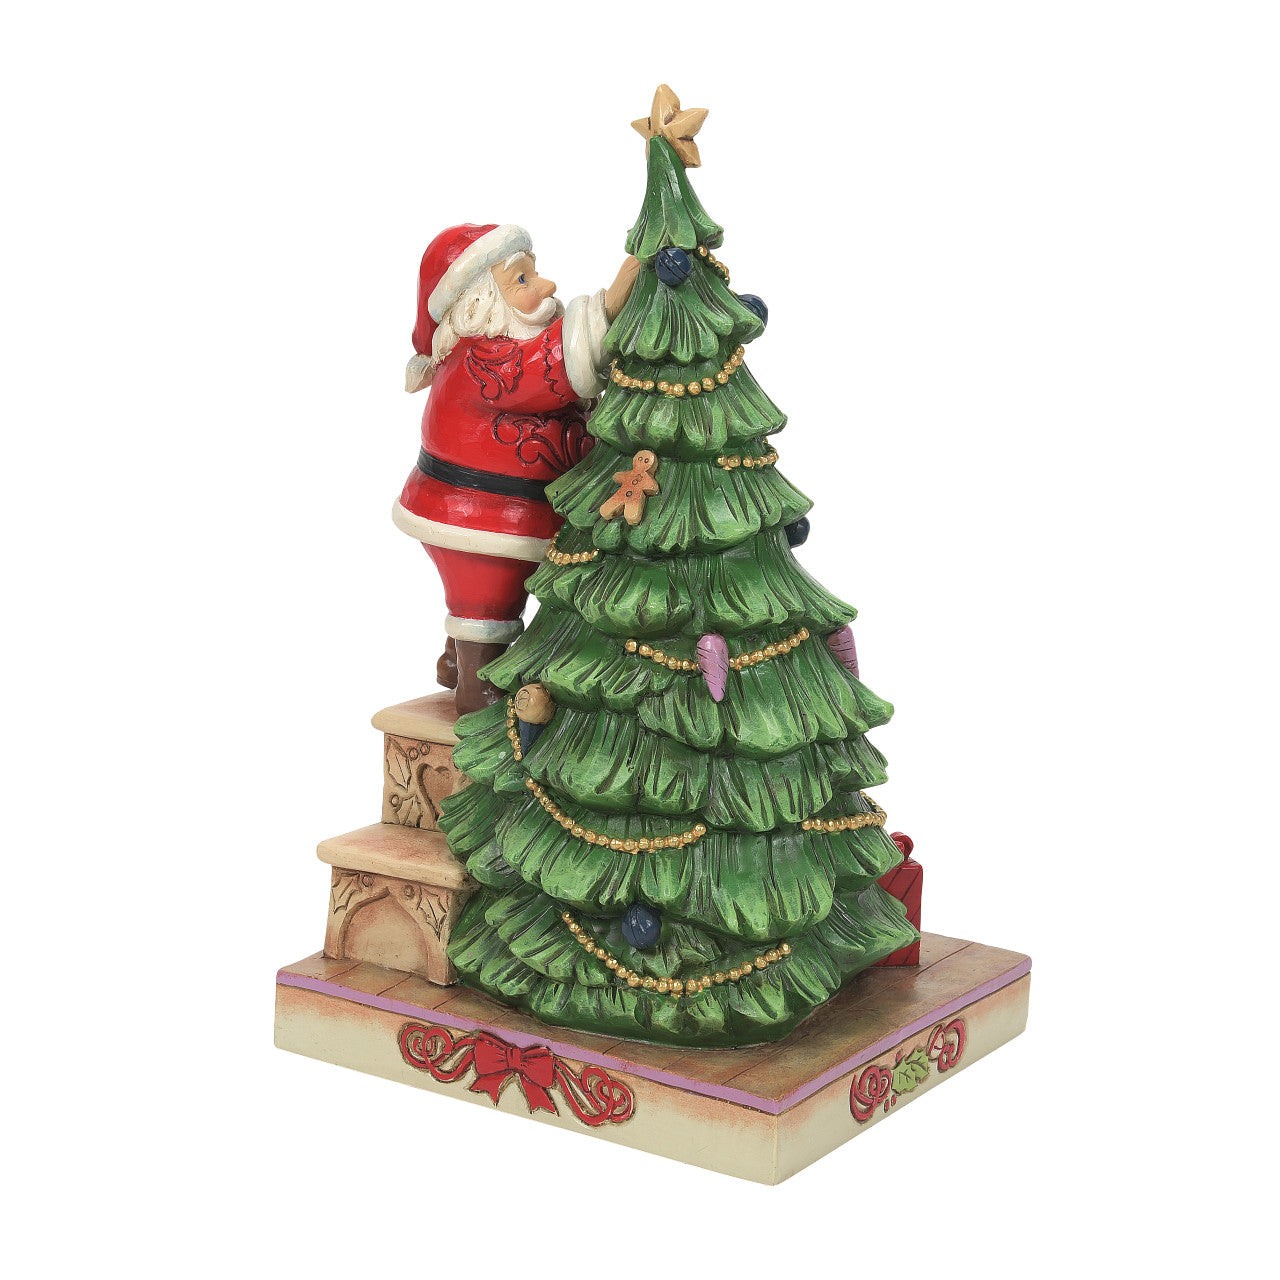 The Most Wonderful Time of the Year - Santa Decorating Tree Figurine